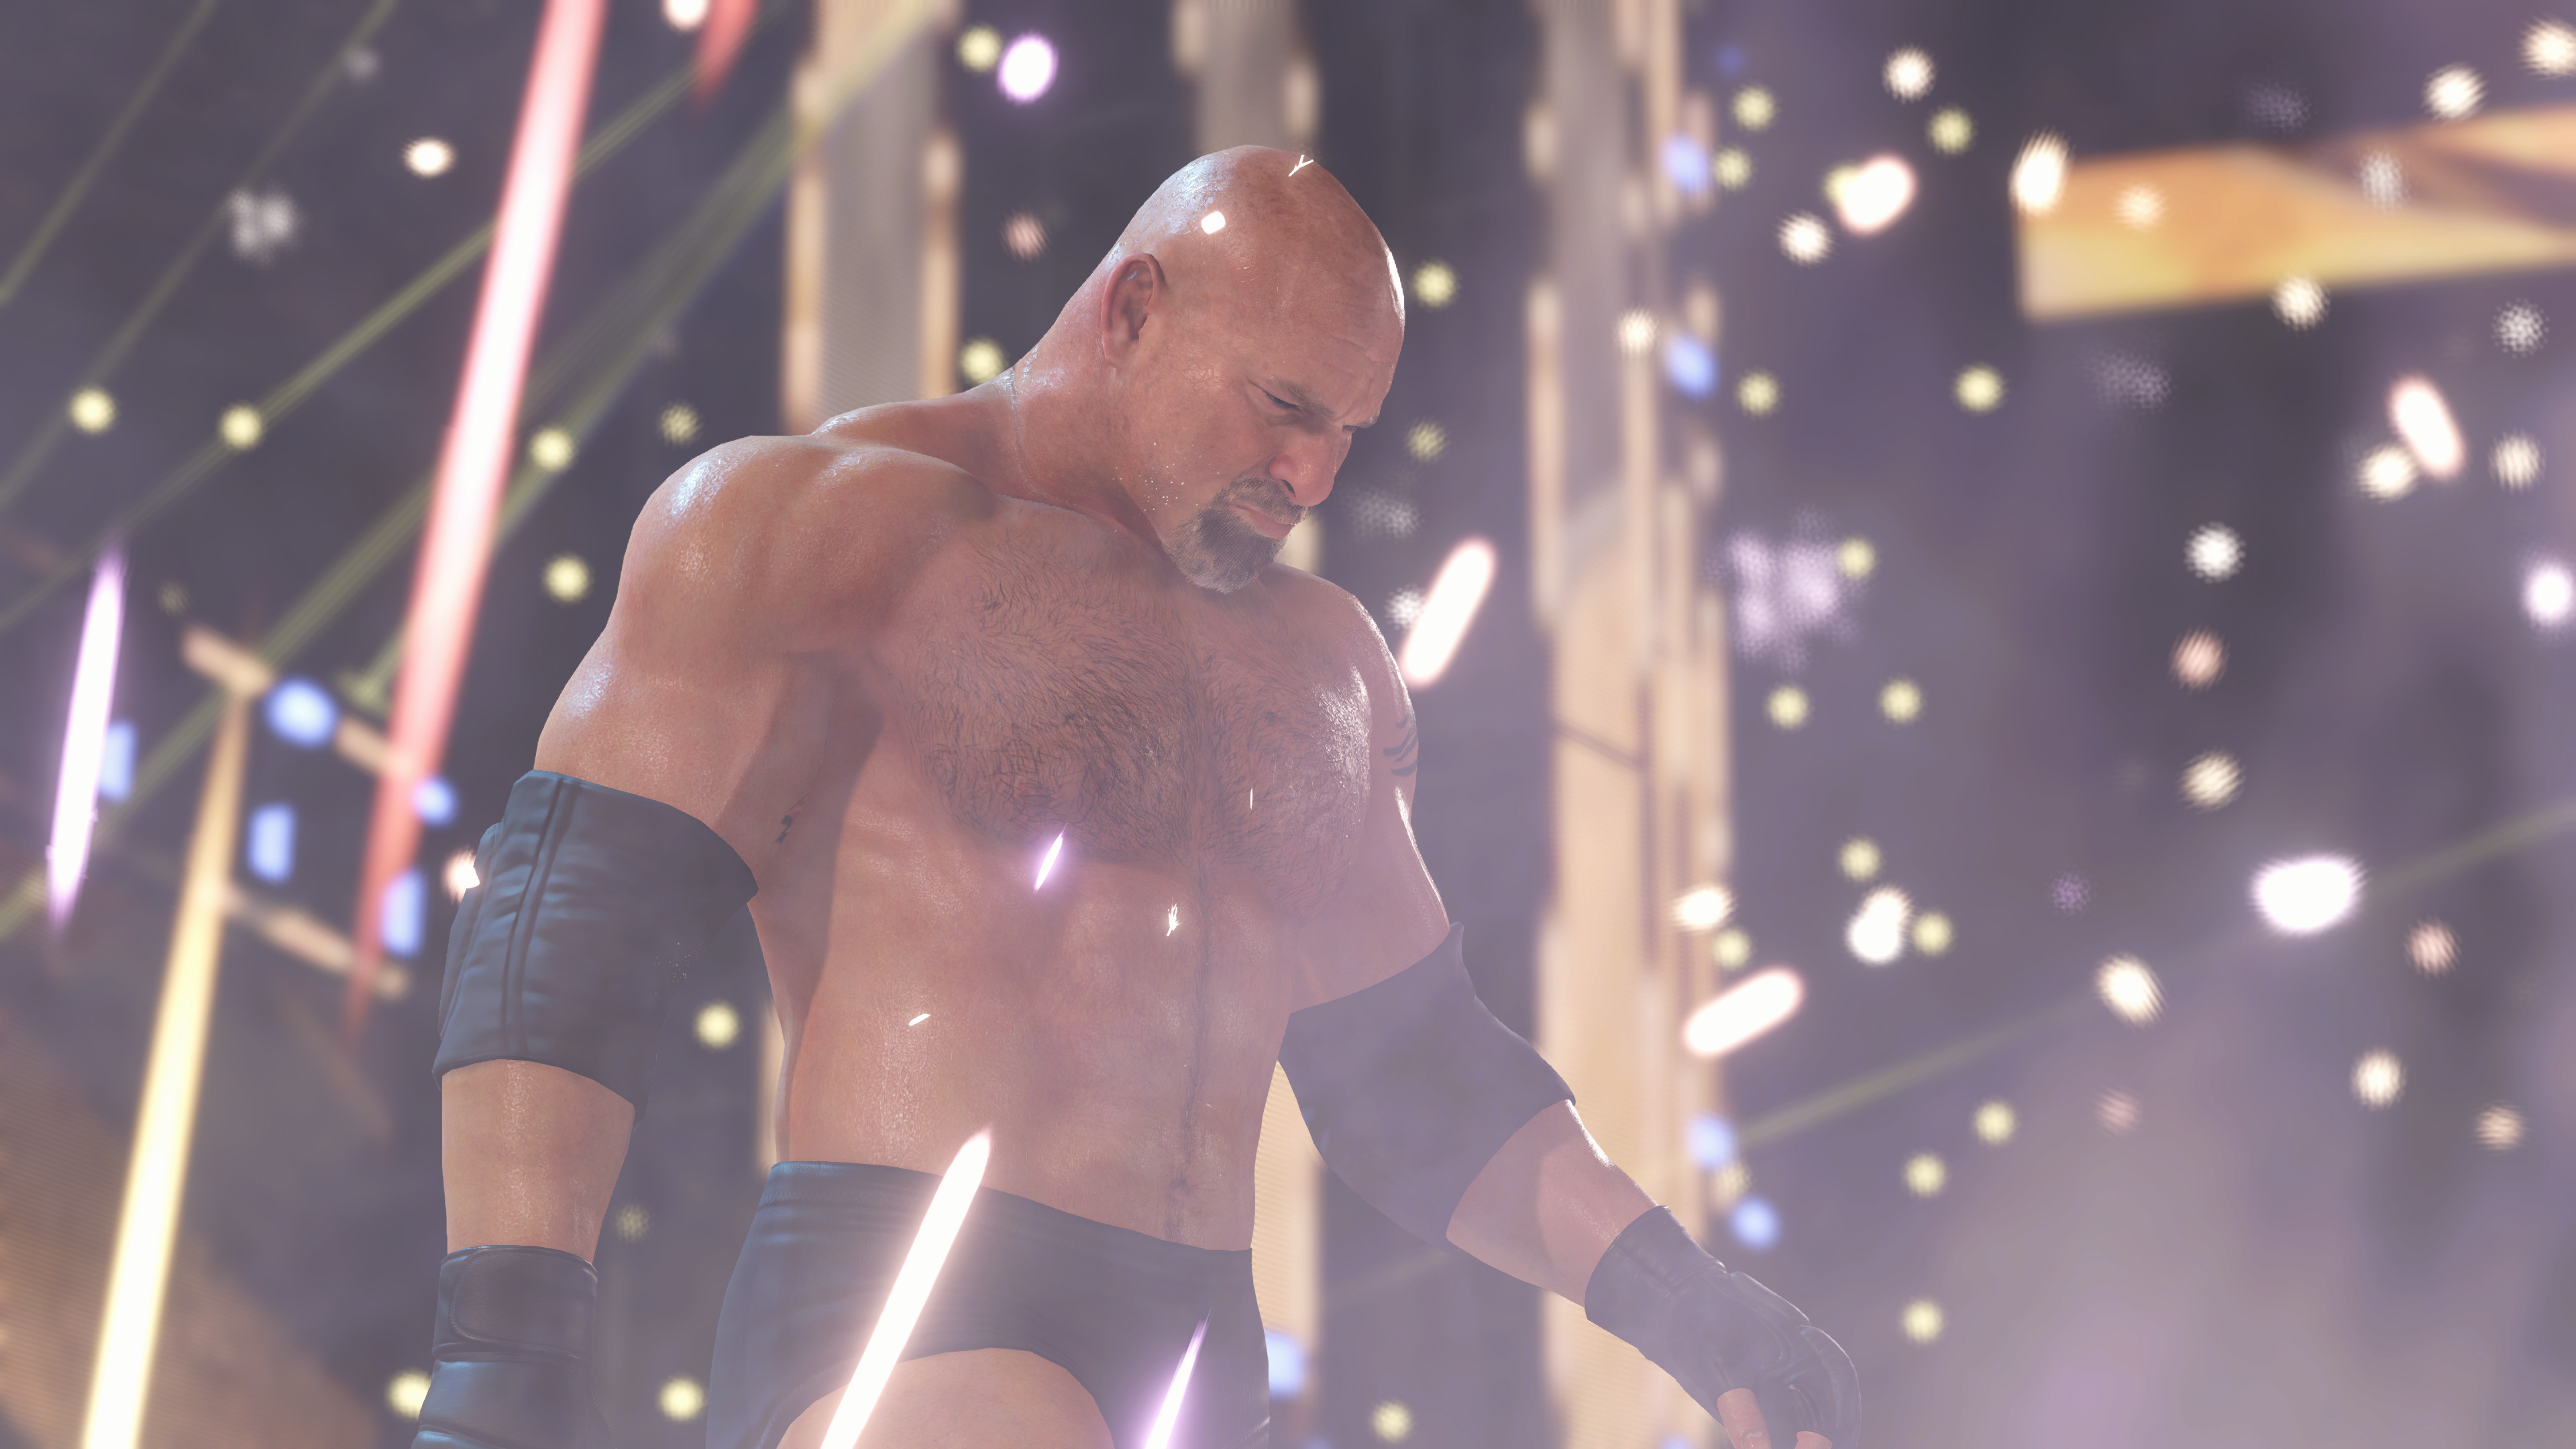 Wwe 2K22 wallpapers for desktop, download free Wwe 2K22 pictures and  backgrounds for PC 